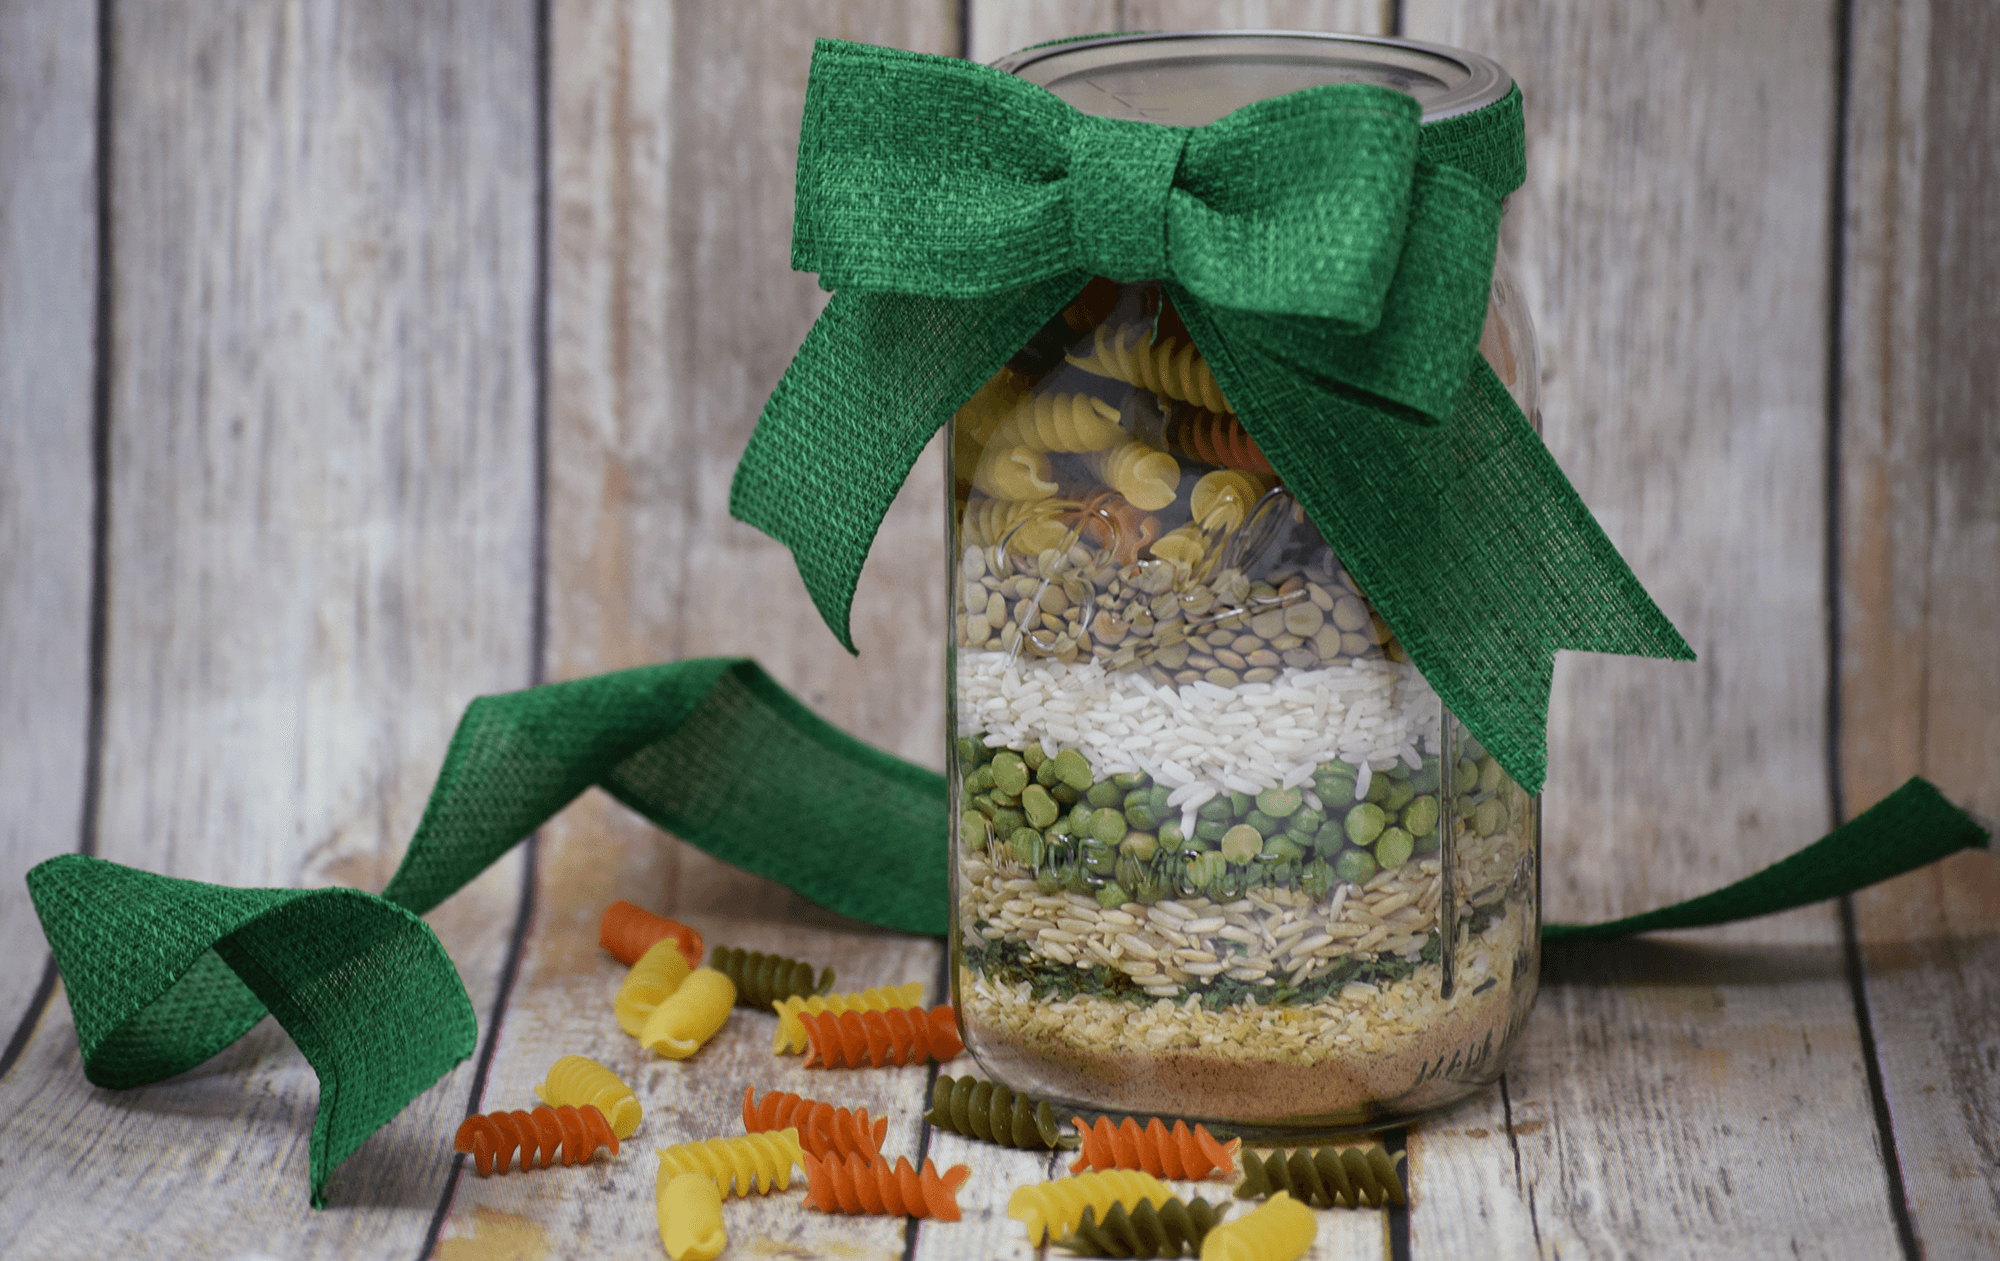 A mason jar with soup ingredients, such as pasta, lentils, split peas and rice, inside of it